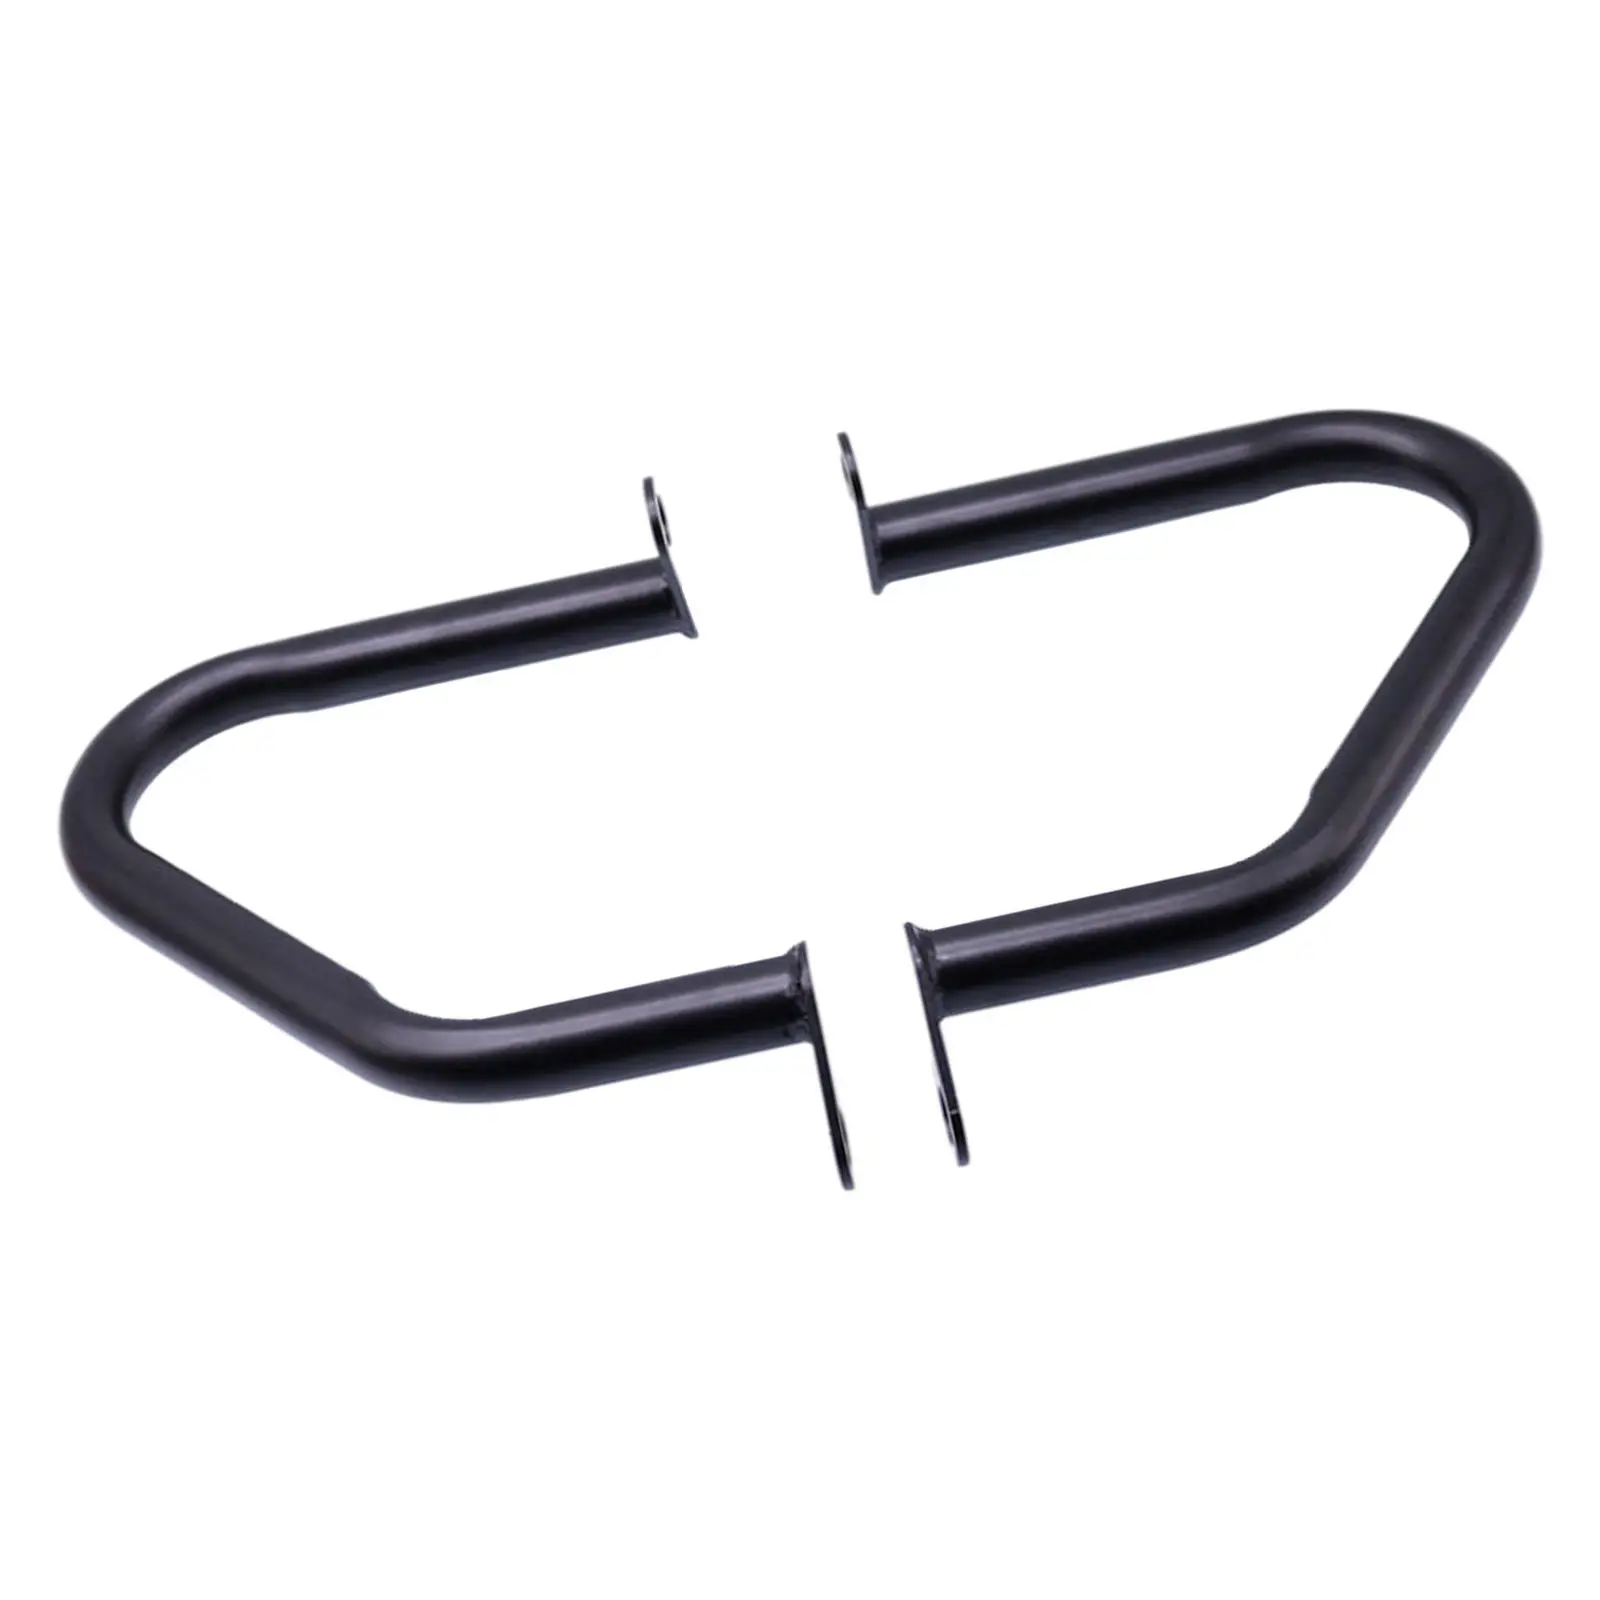 Engine Guard Crash Bars Replaces for T120 Thruxton Durable Professional